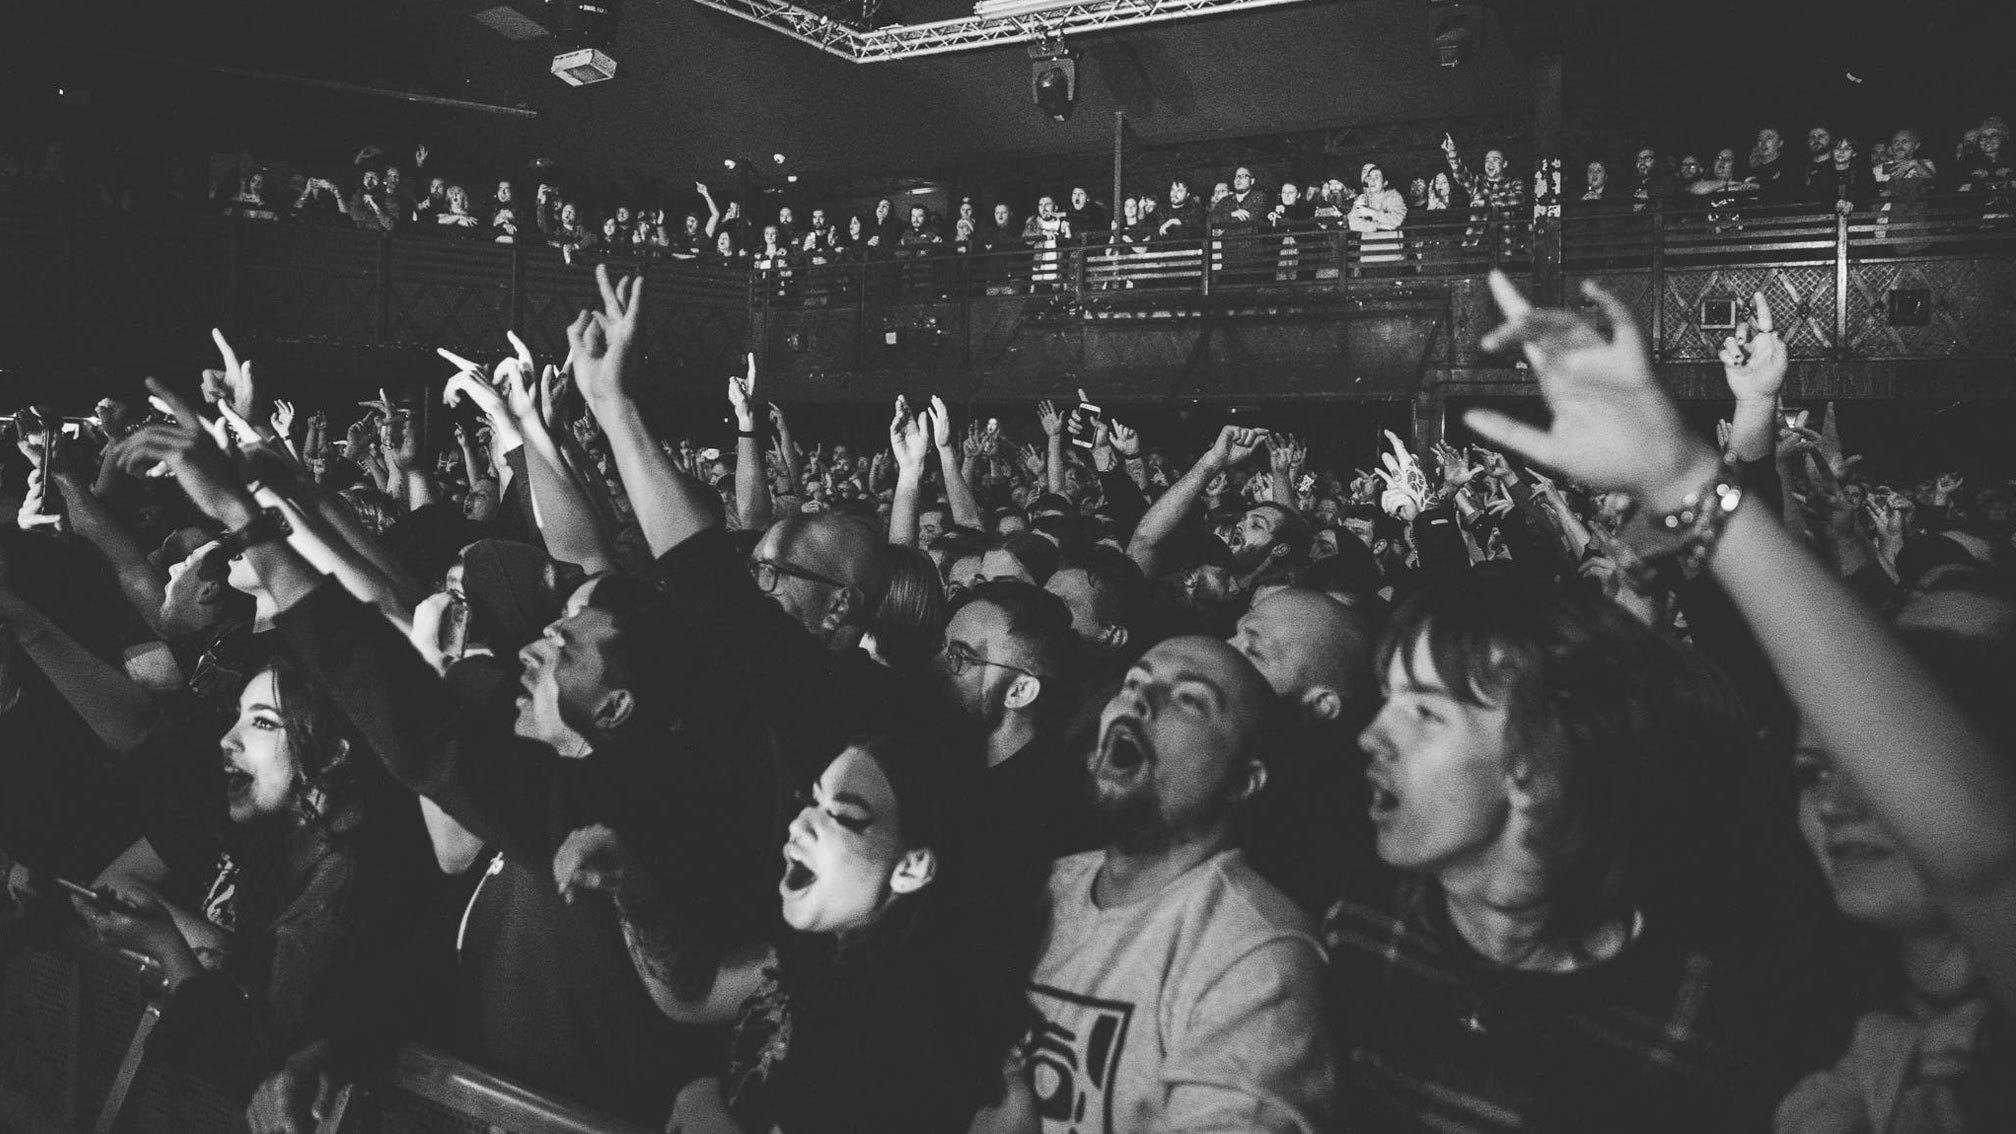 “The cost of gigging crisis”: How rising prices are affecting your favourite bands